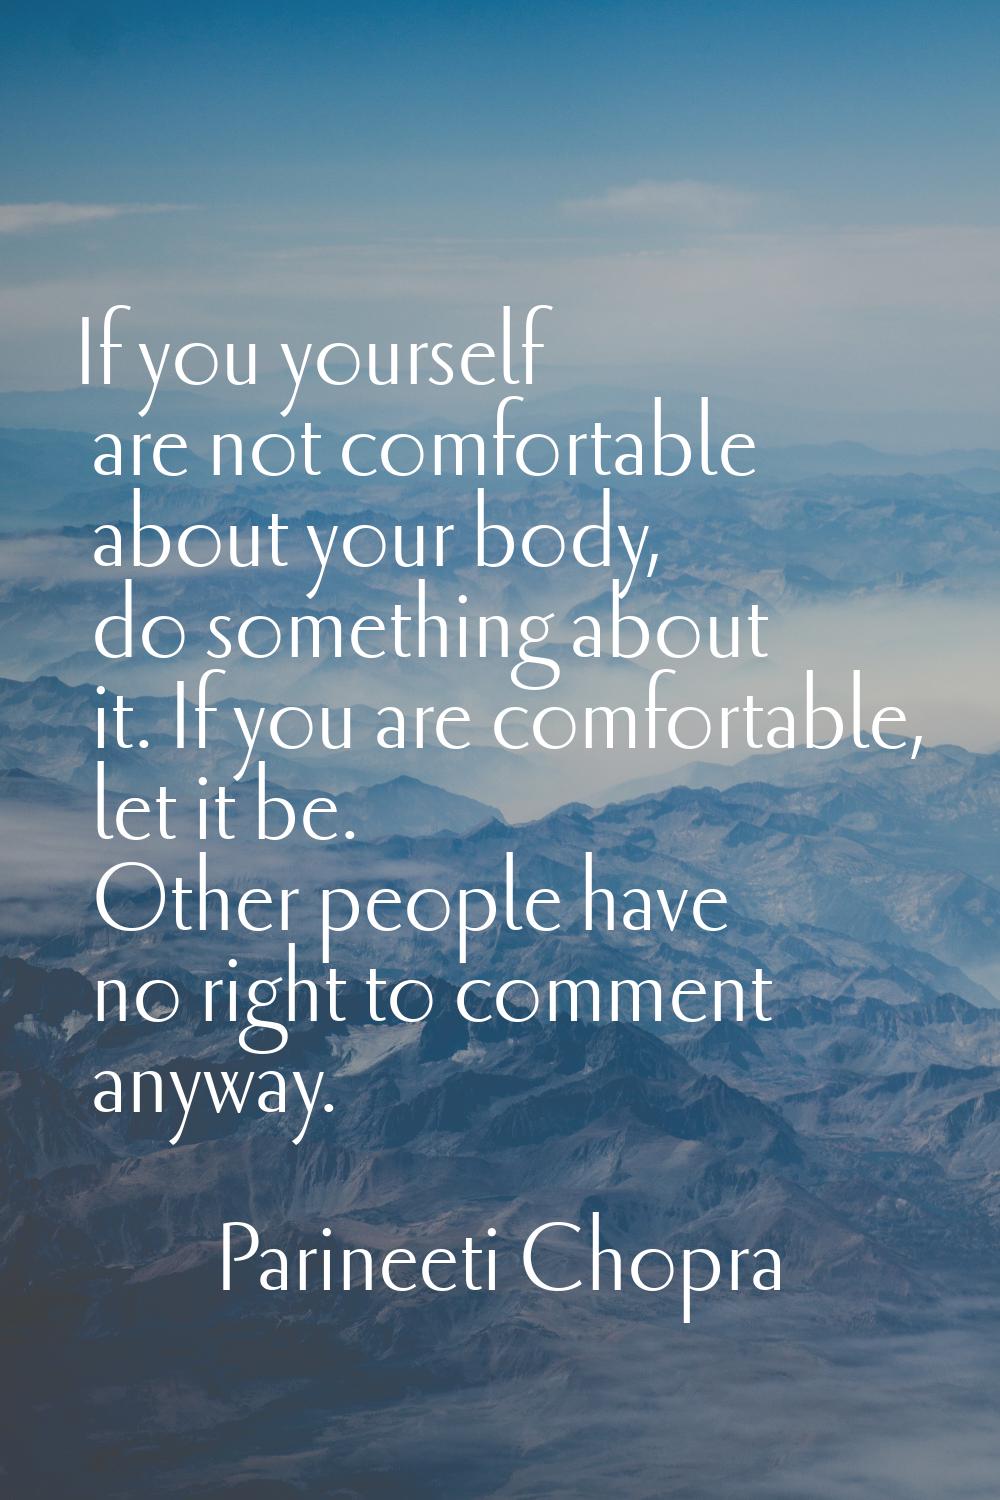 If you yourself are not comfortable about your body, do something about it. If you are comfortable,